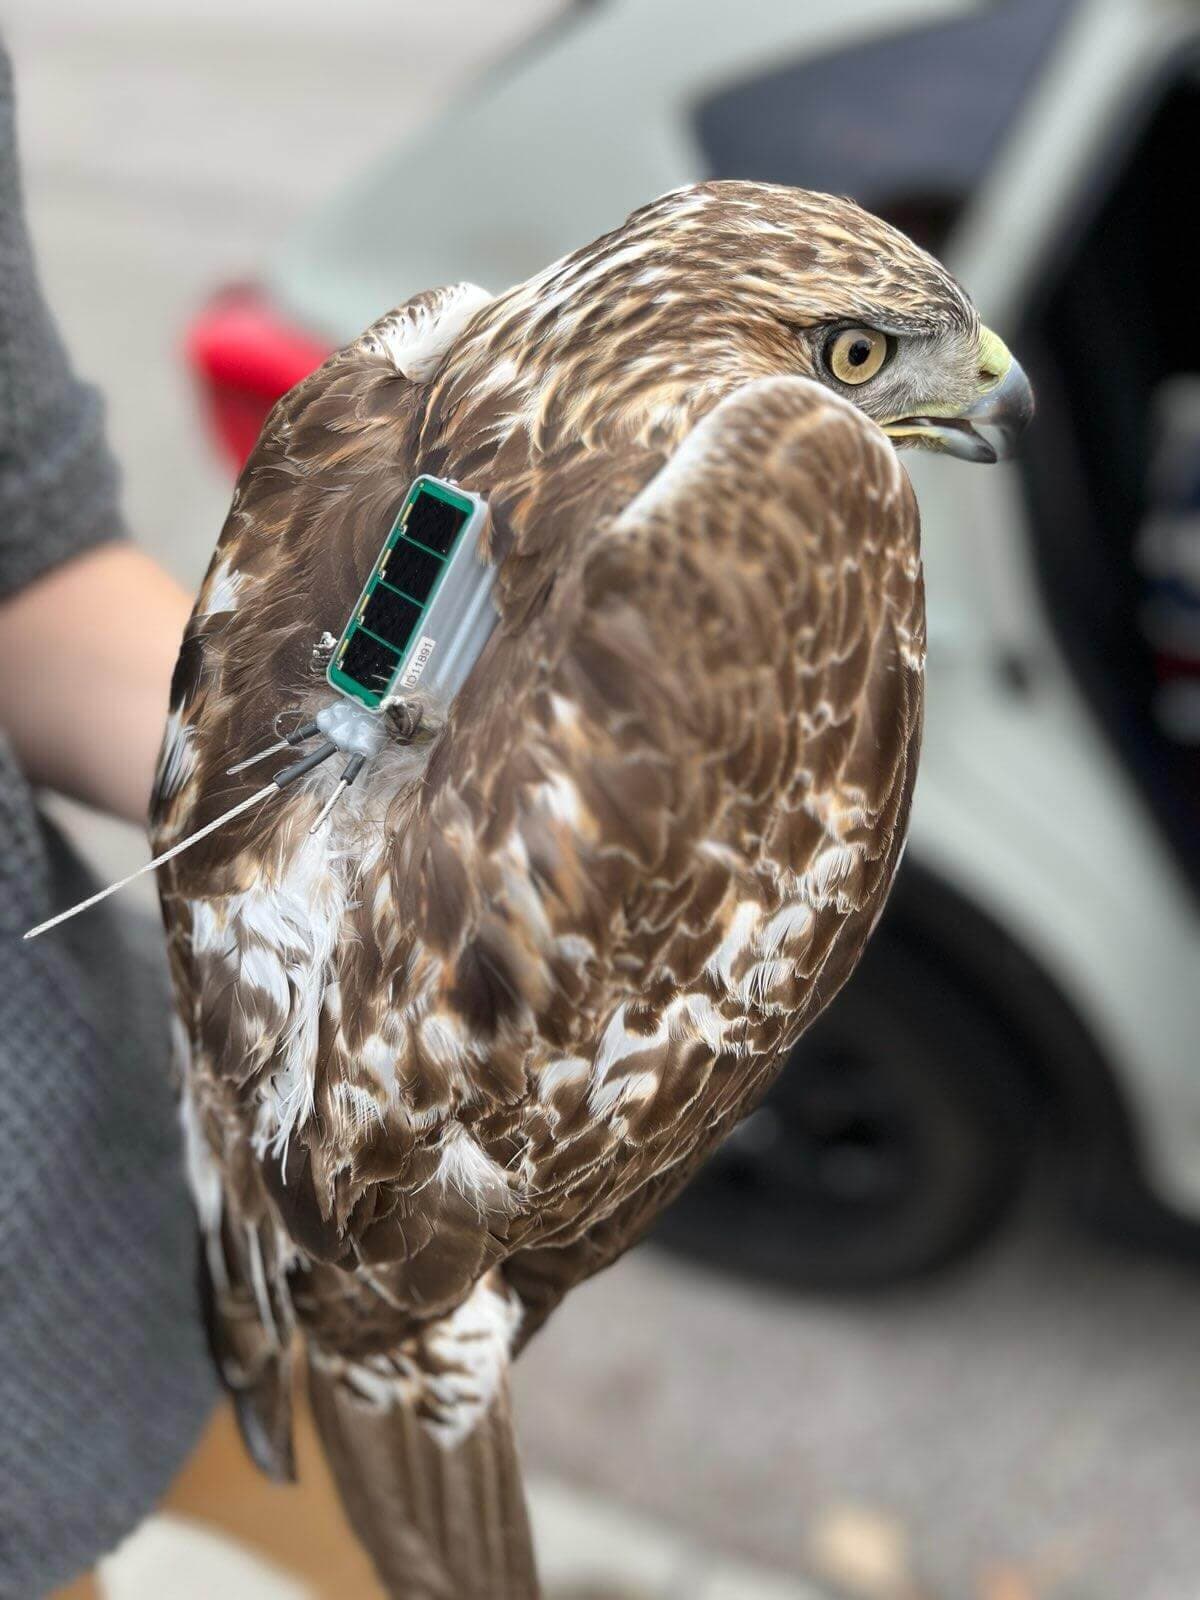 A Red-tailed Hawk shortly before release with a GPS tag